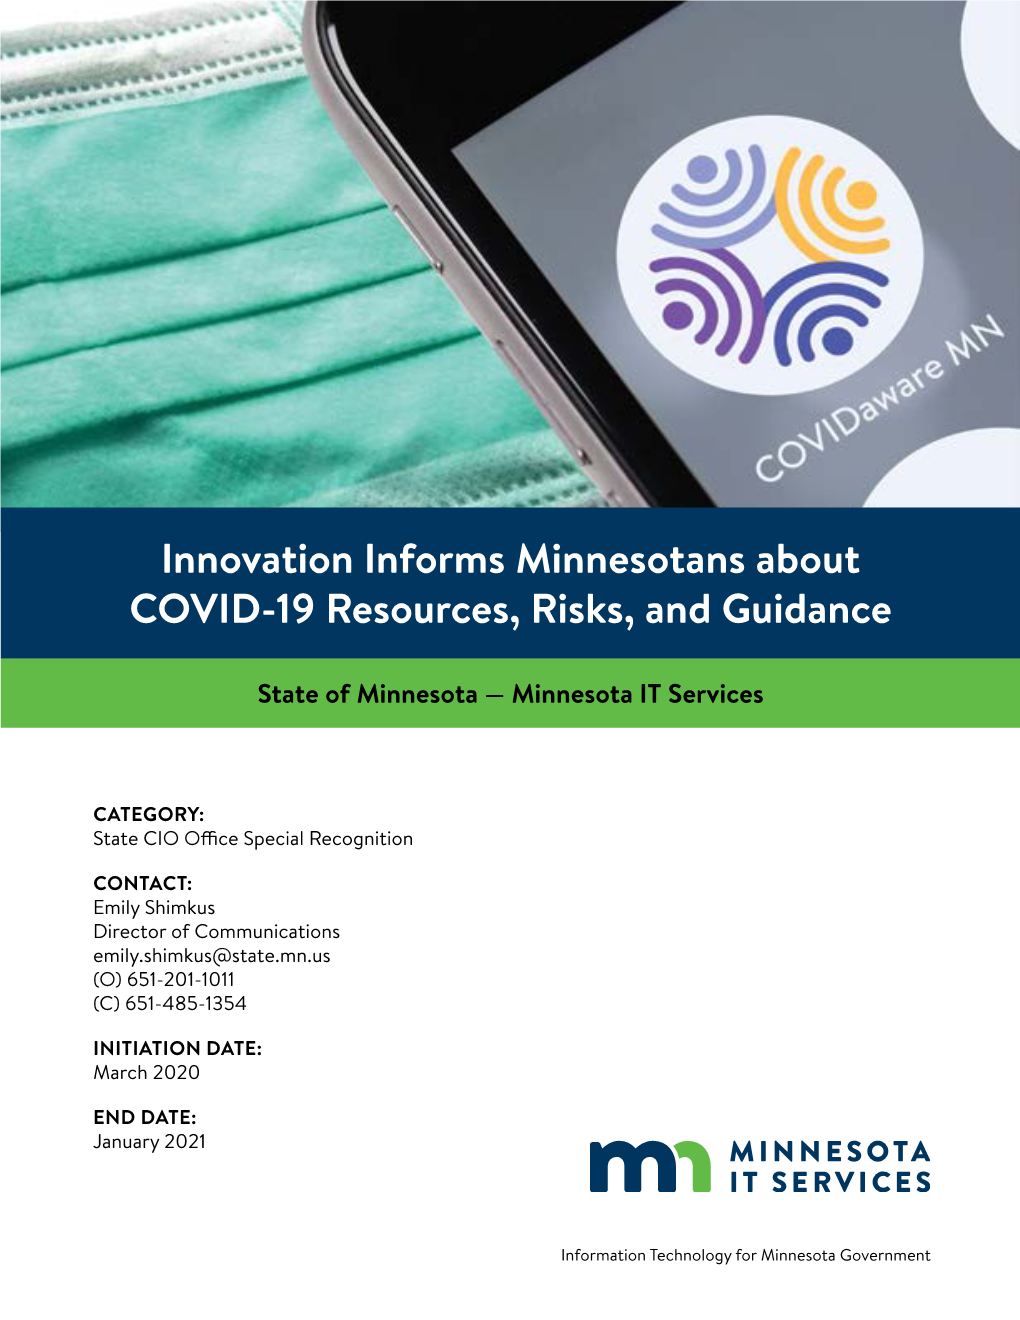 Innovation Informs Minnesotans About COVID-19 Resources, Risks, and Guidance